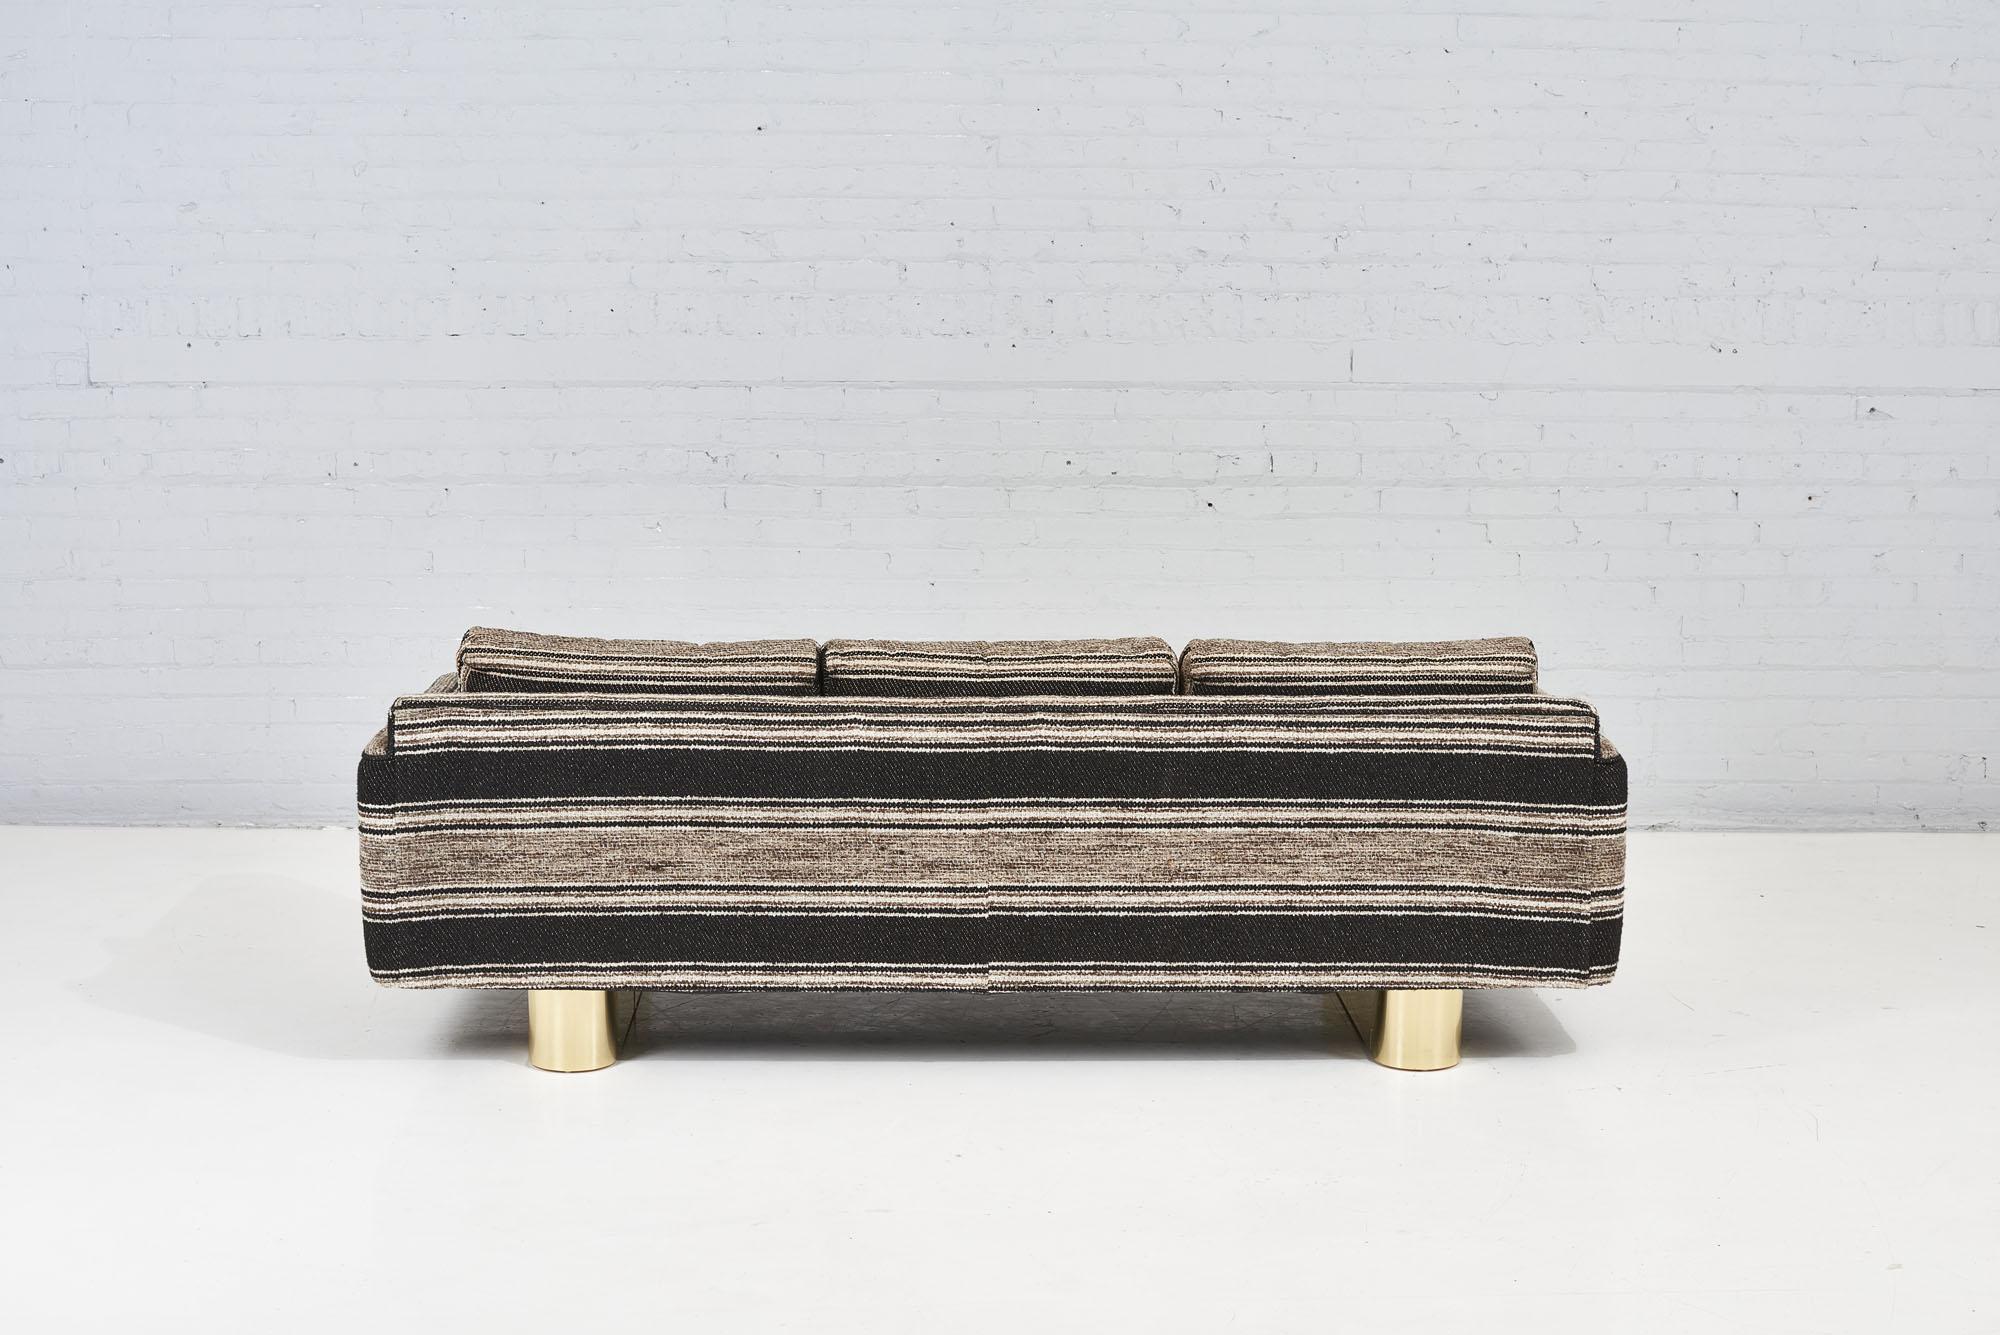 Selig 1970's Sofa on Brass Plinth Bases For Sale 2